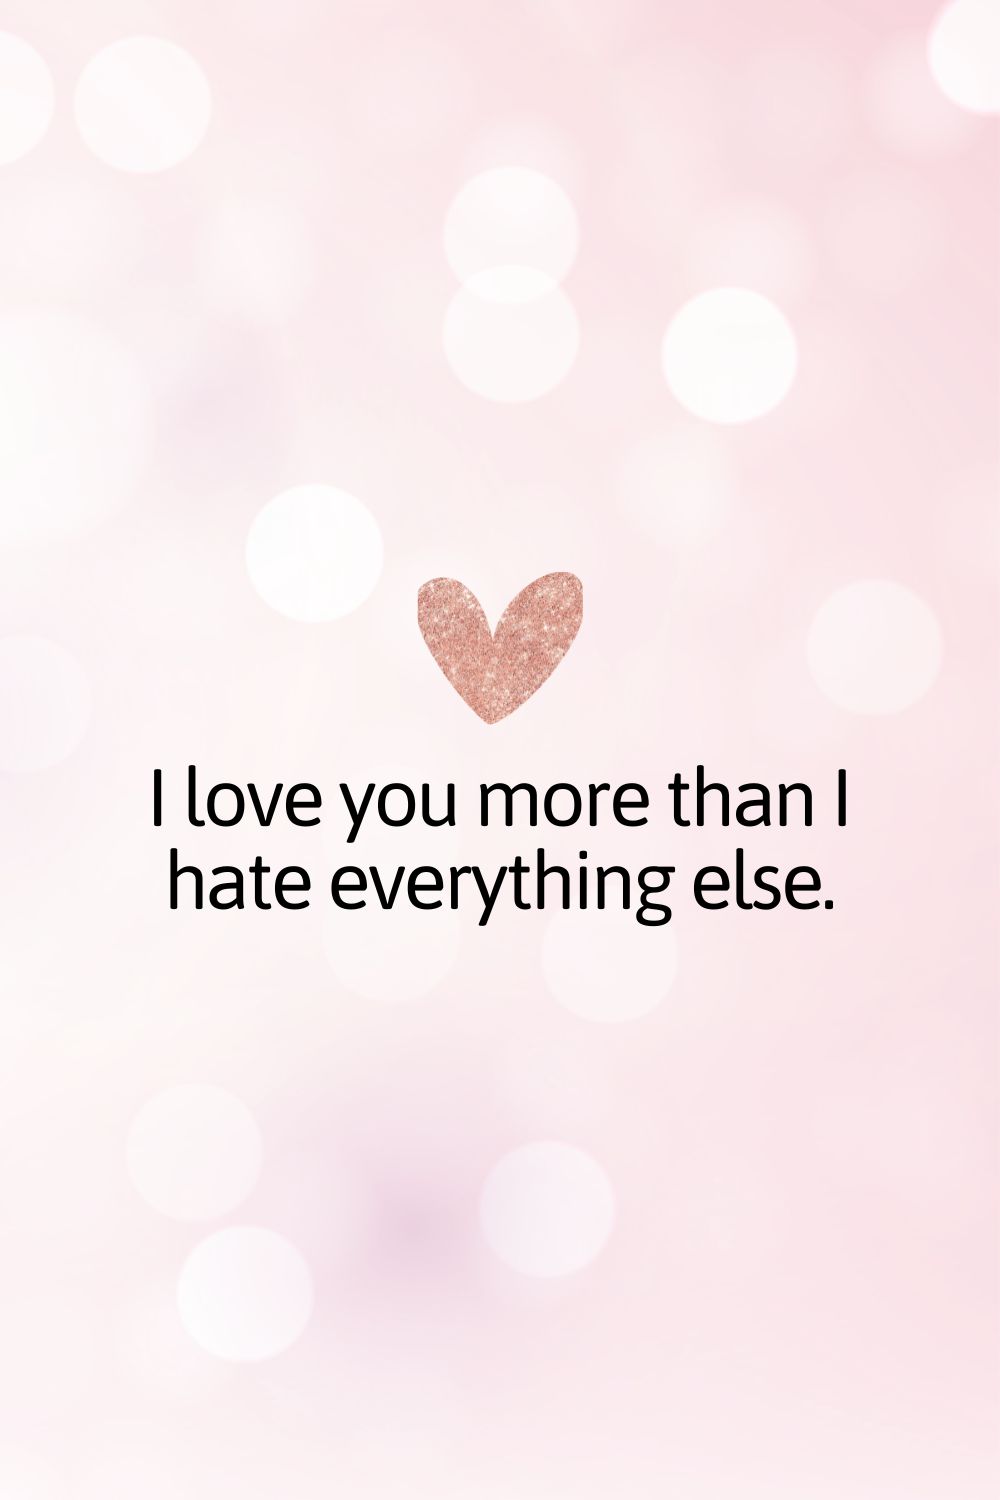 I love you more than I hate everything else